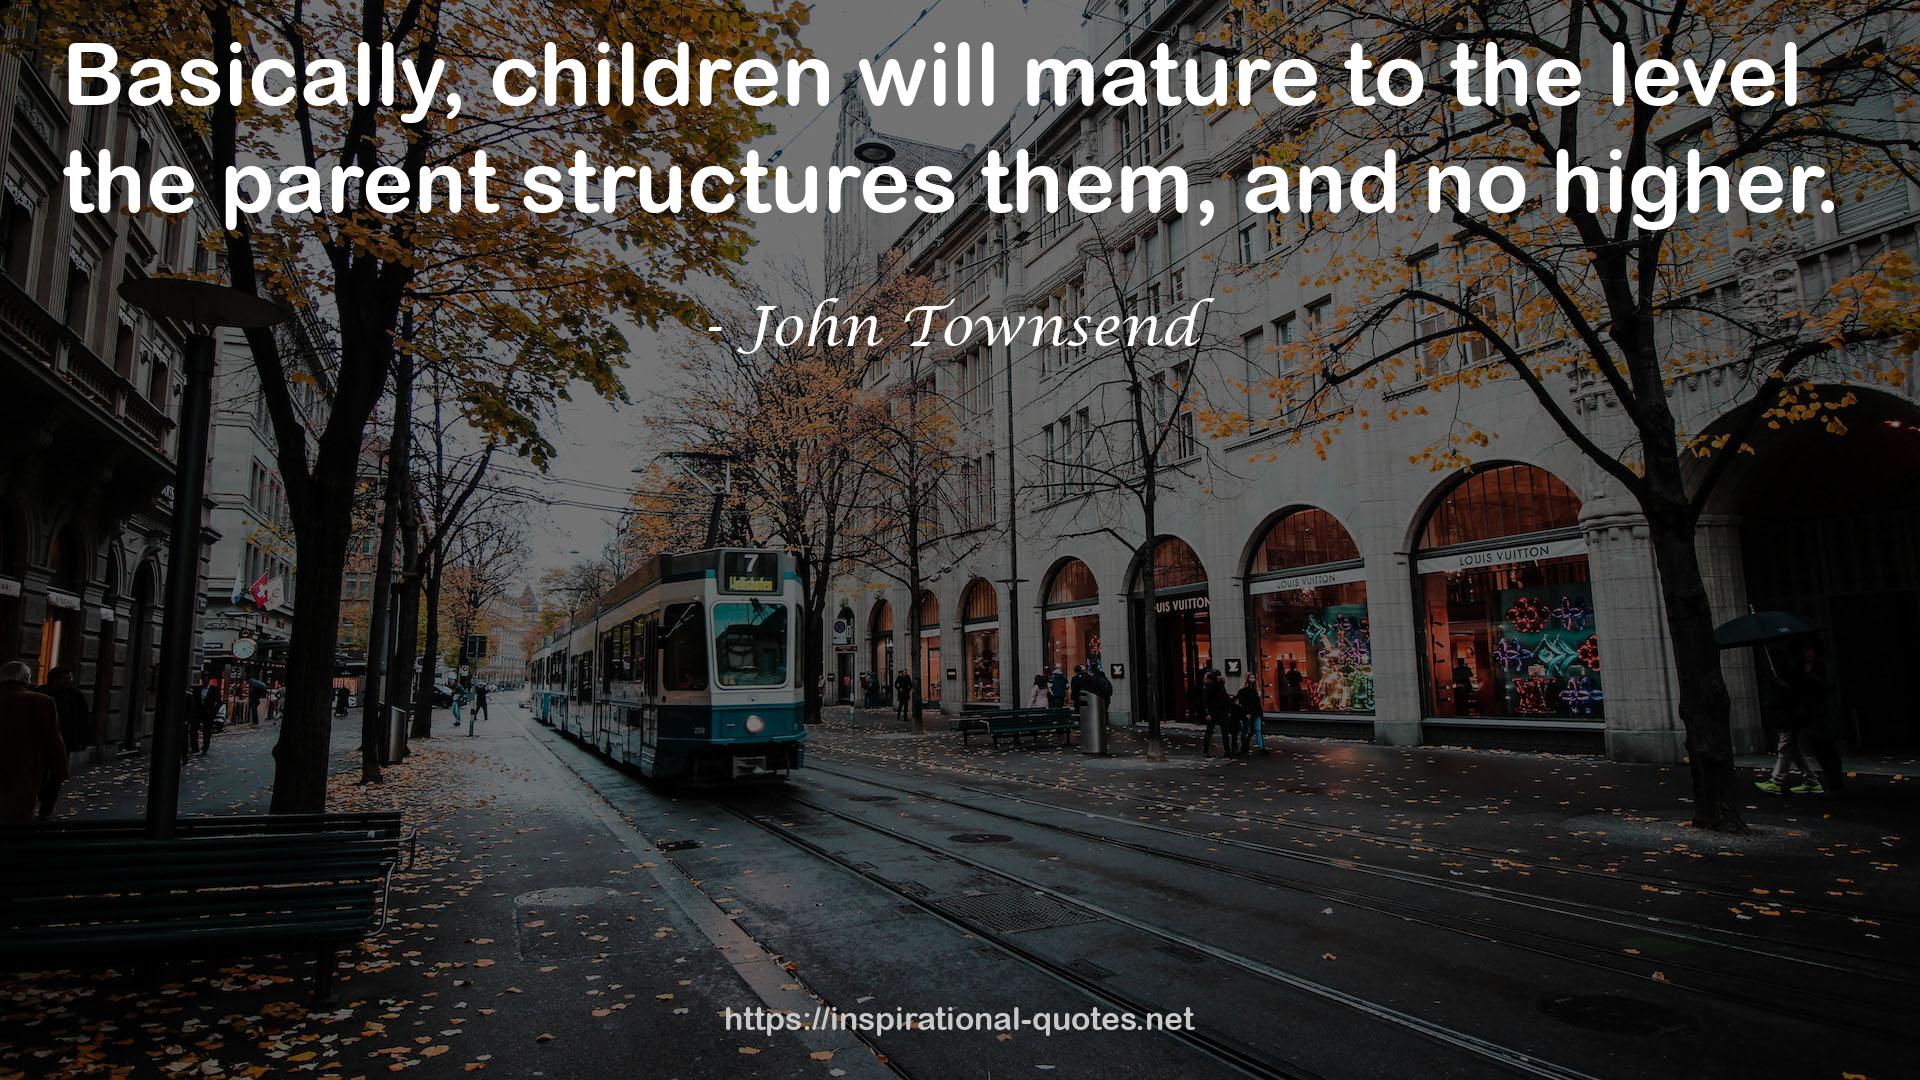 John Townsend QUOTES